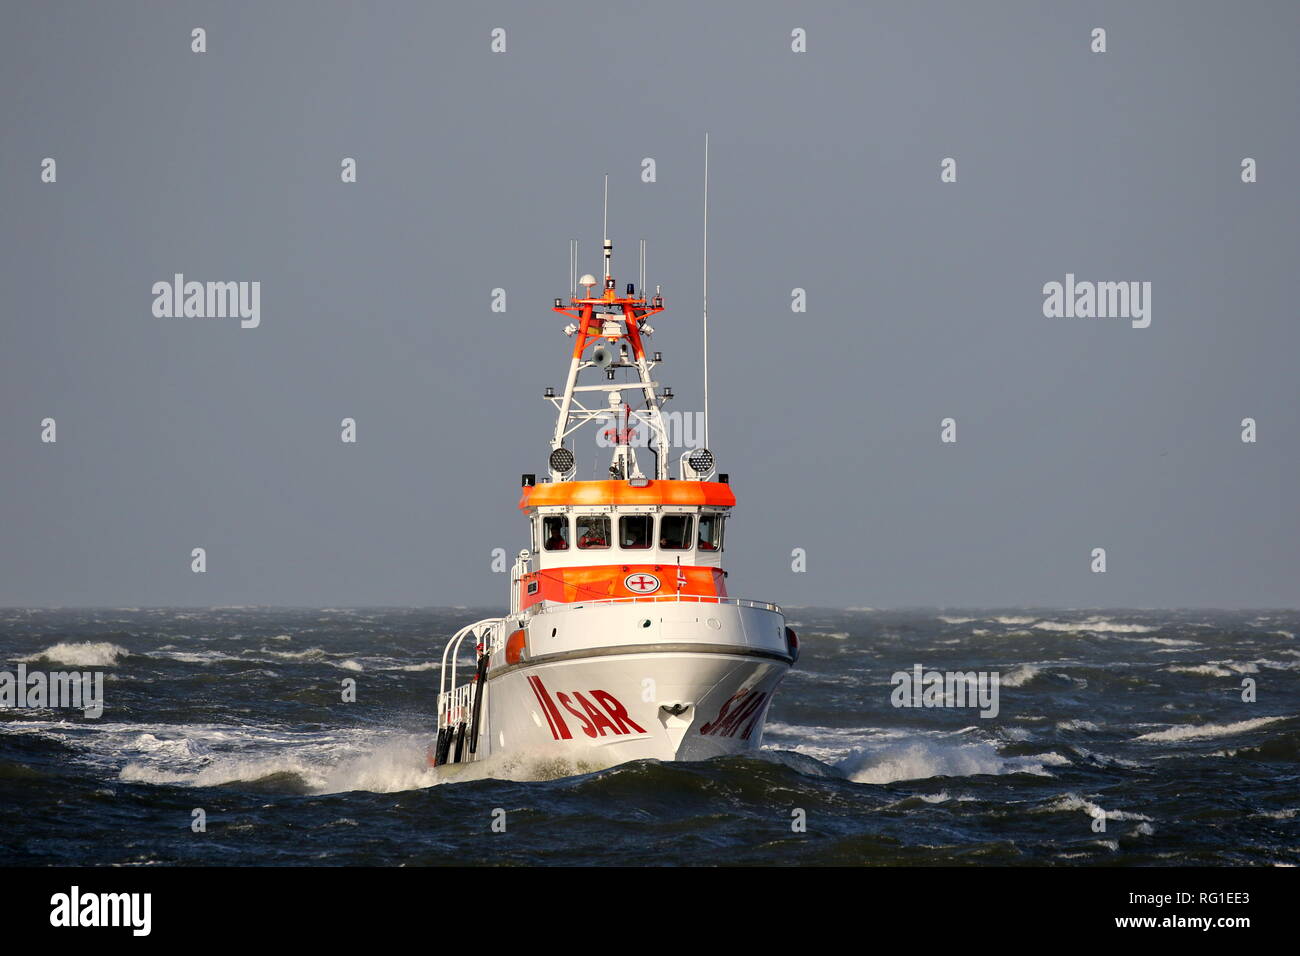 The SAR ship Anneliese Kramer passes on January 1, 2019 the port of Cuxhaven in a stormy sea. Stock Photo